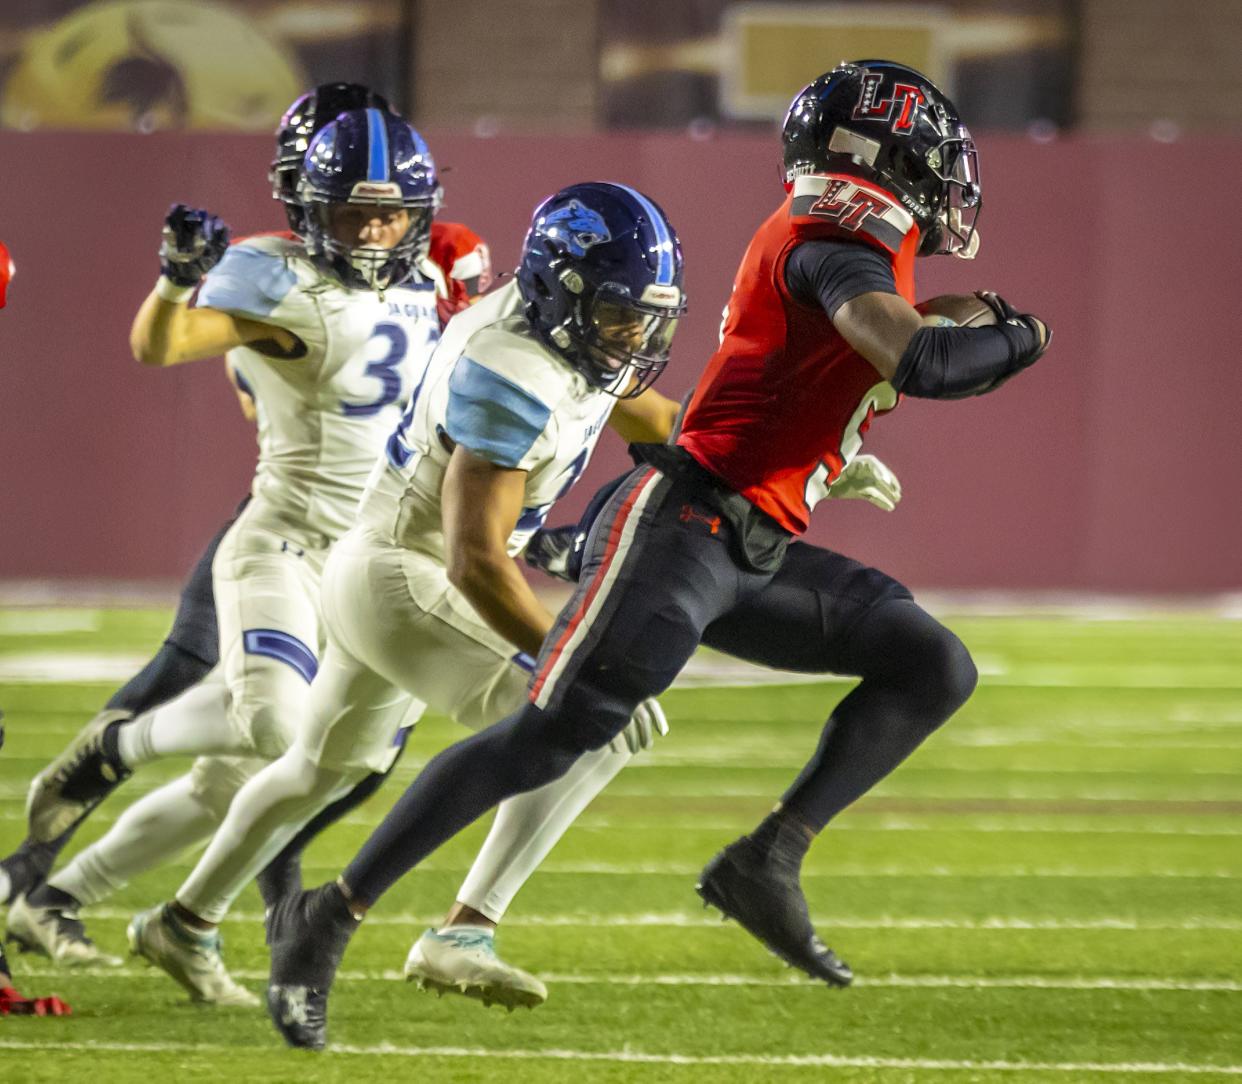 Lake Travis senior receiver and special teams contributor Josiah Estes, breaking free against Johnson, has found a new home at the University of San Diego.